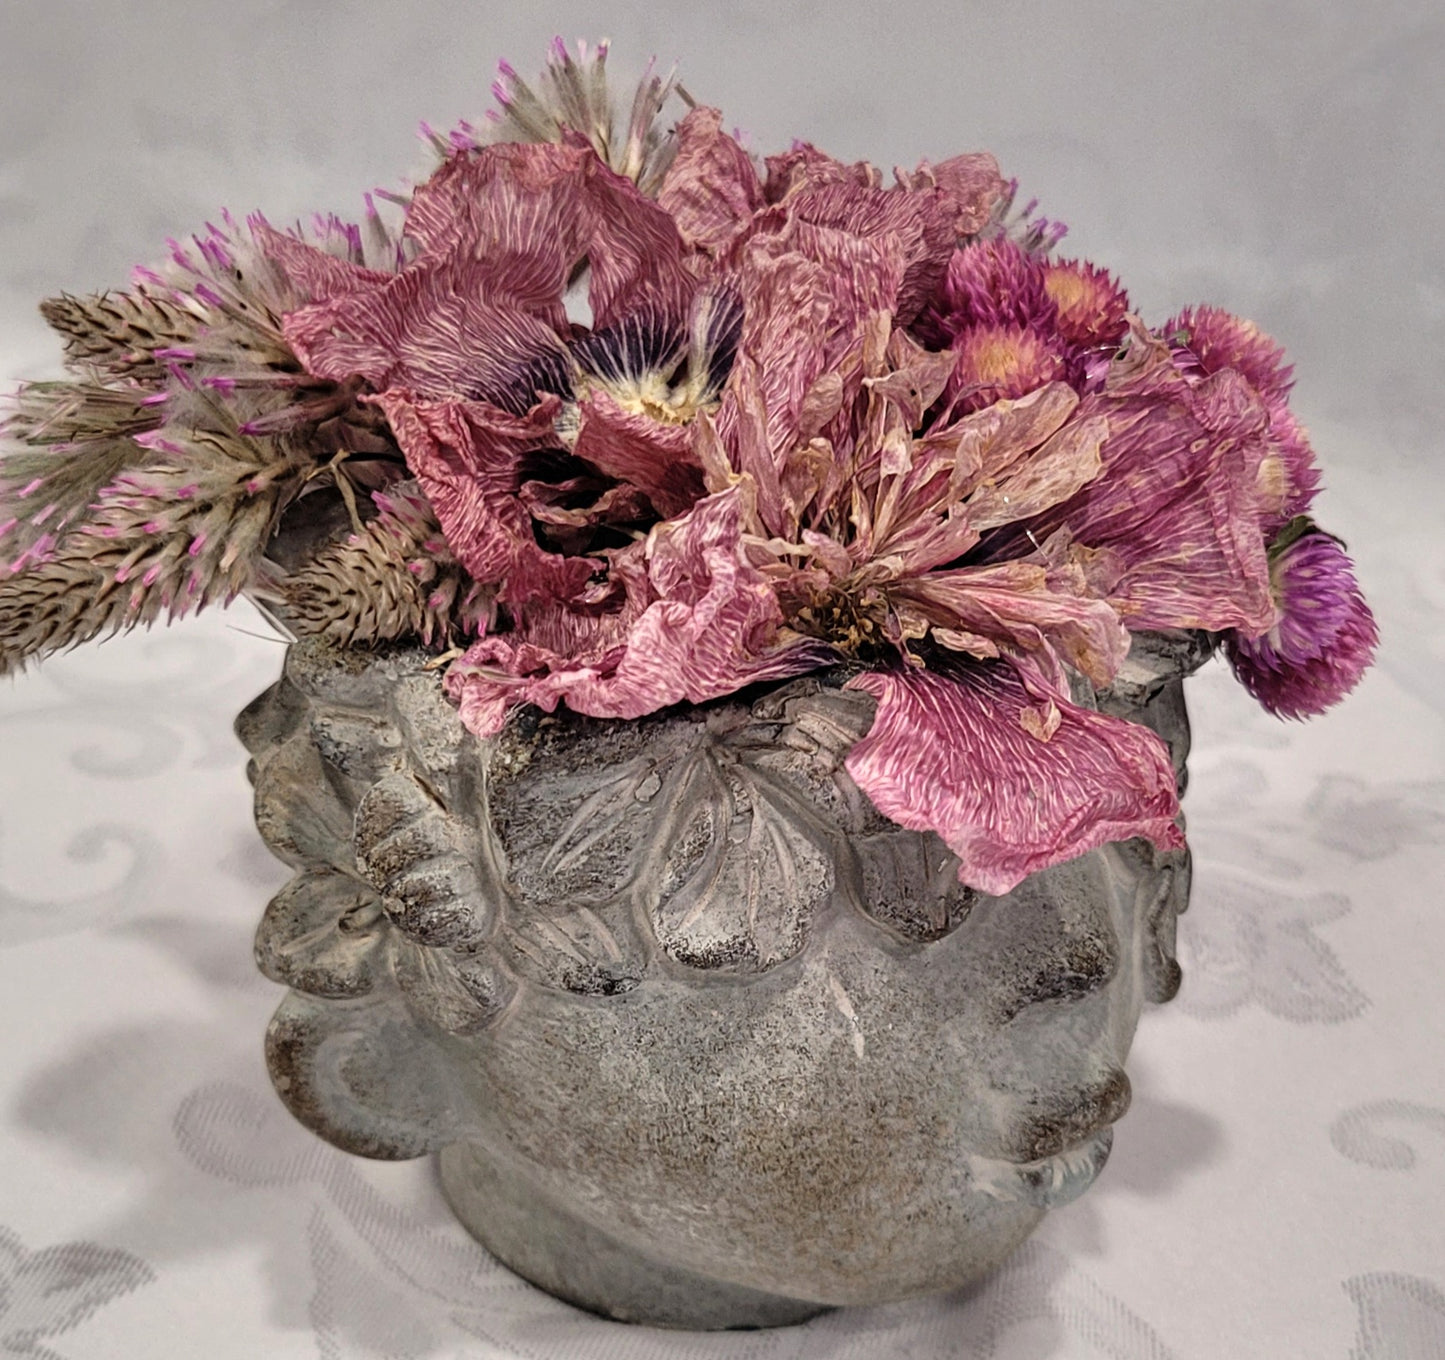 Dried flowers in a Cement Head Vase